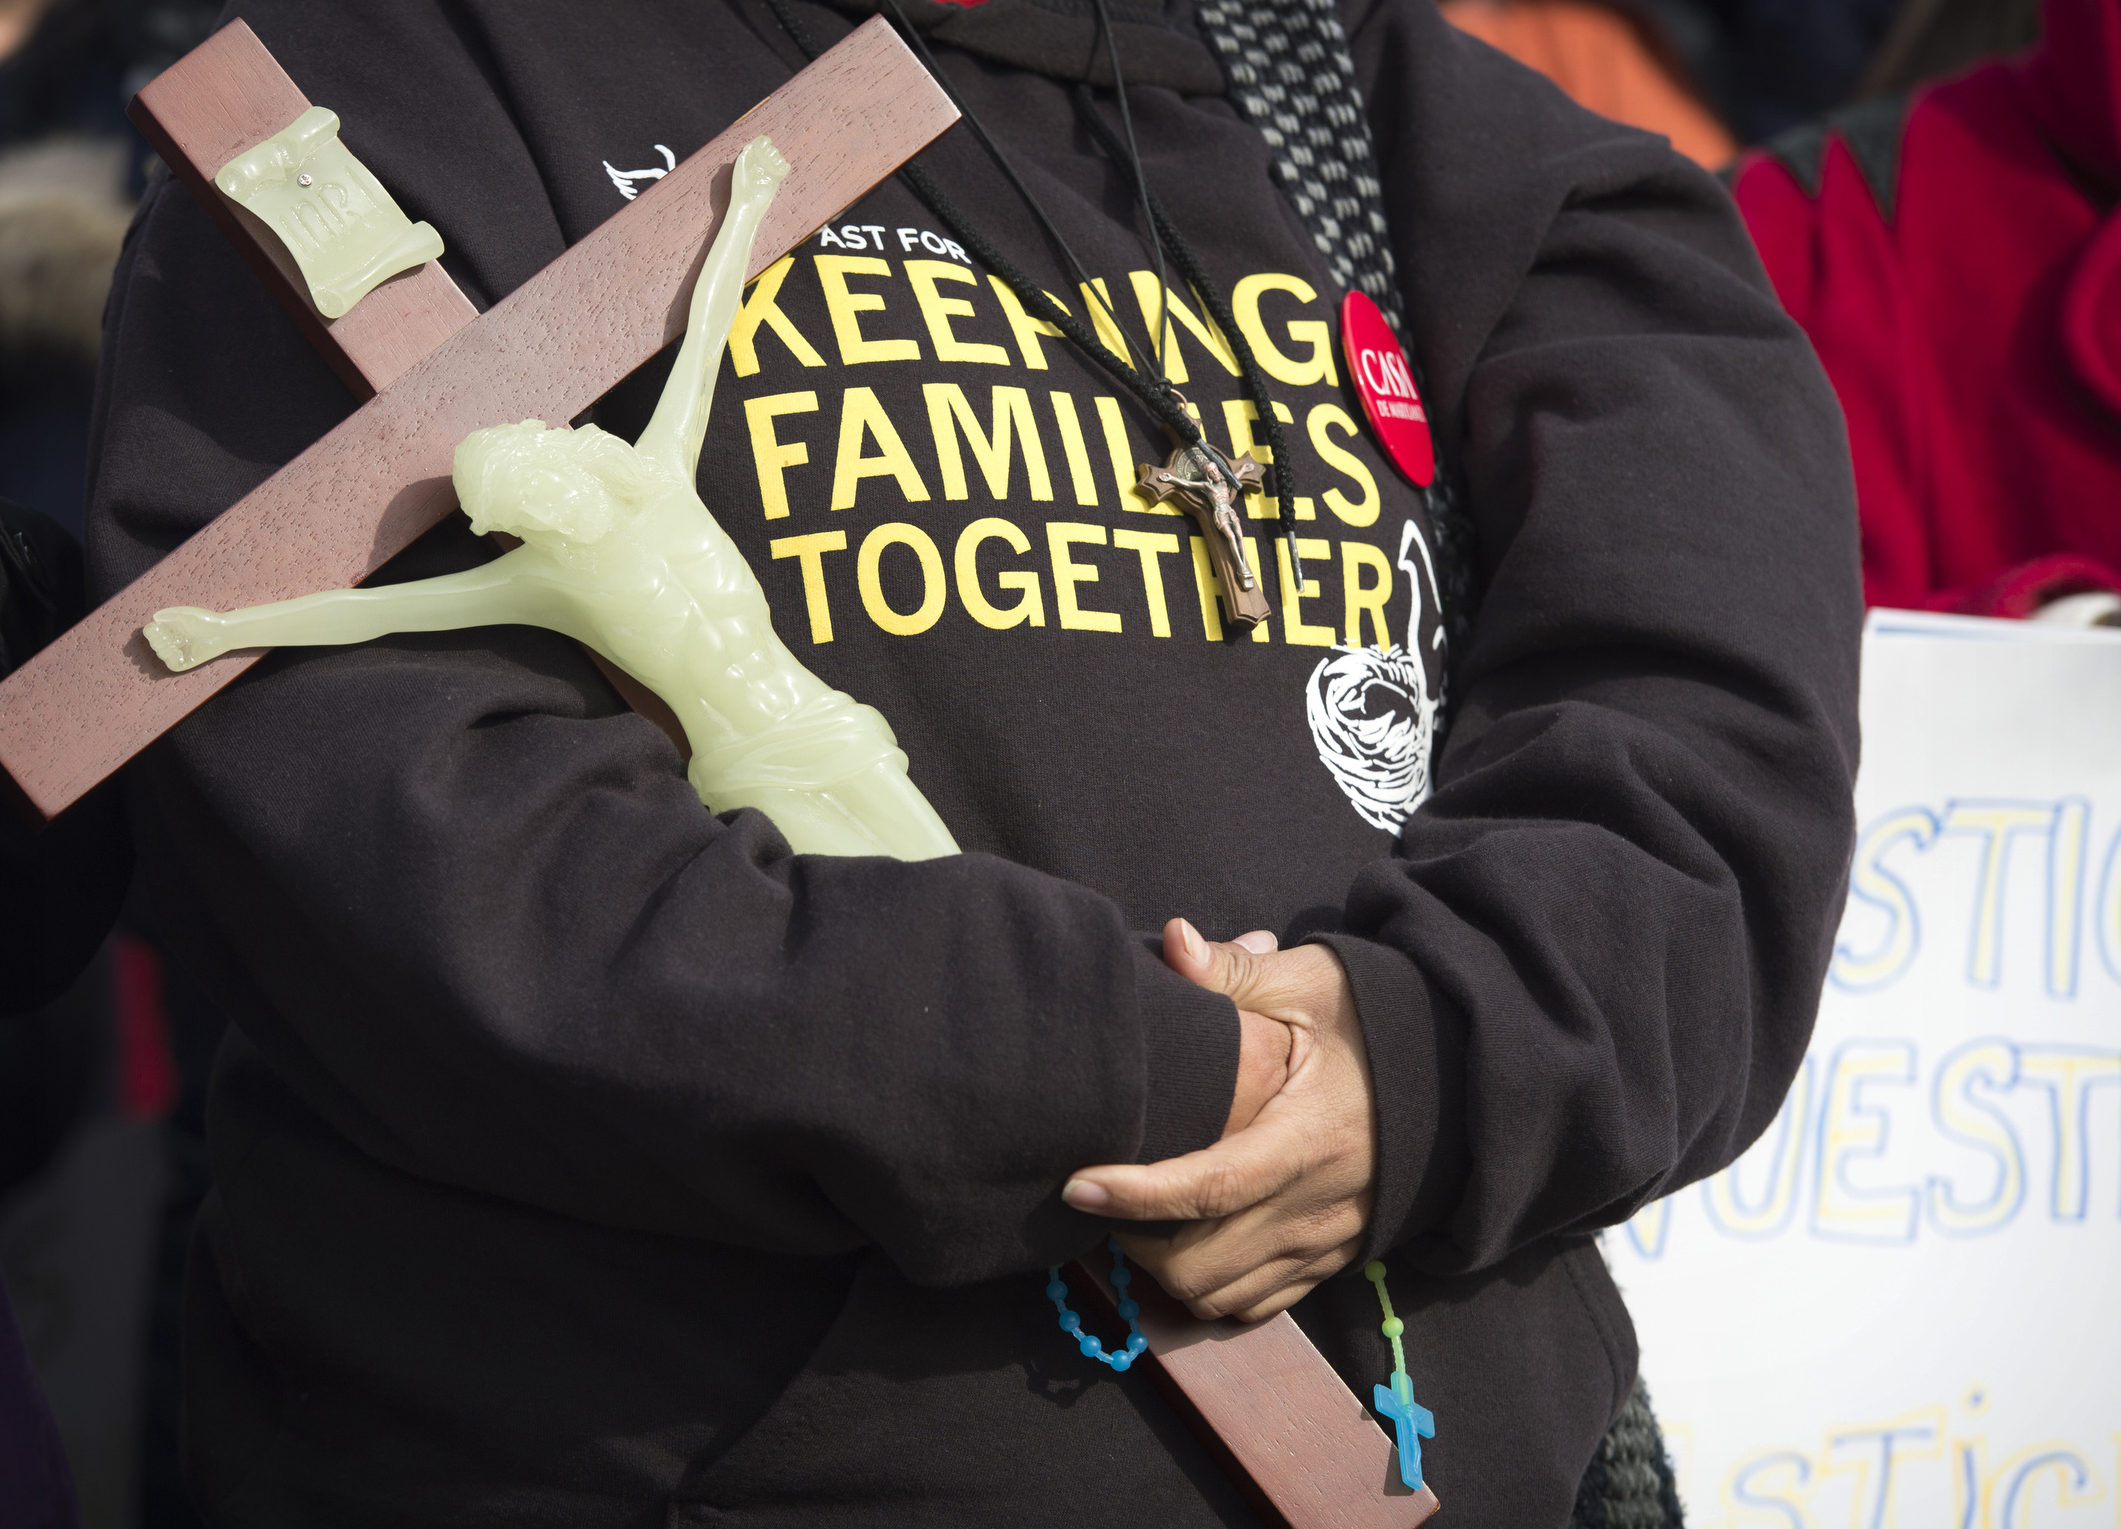 A woman holds a crucifix during a rally sponsored by immigration advocates Jan. 15 outside the Supreme Court in Washington. (CNS photo/Michael Reynolds, EPA) See GSR-SISTERS-IMMIGRATION March 17, 2016.